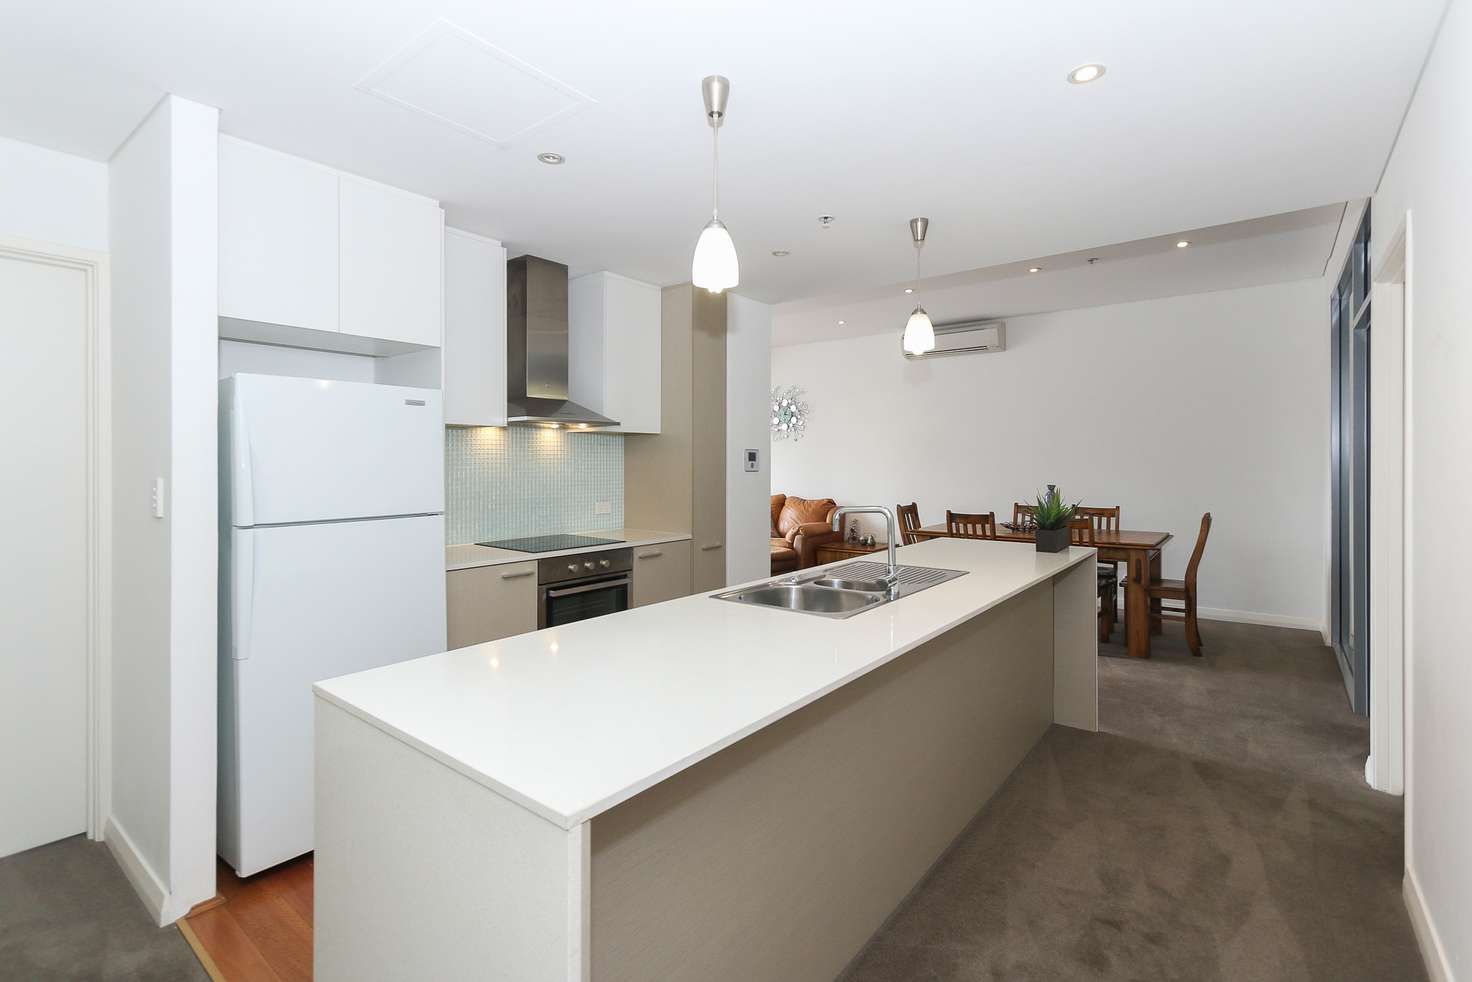 Main view of Homely apartment listing, 101/580 Hay Street, Perth WA 6000